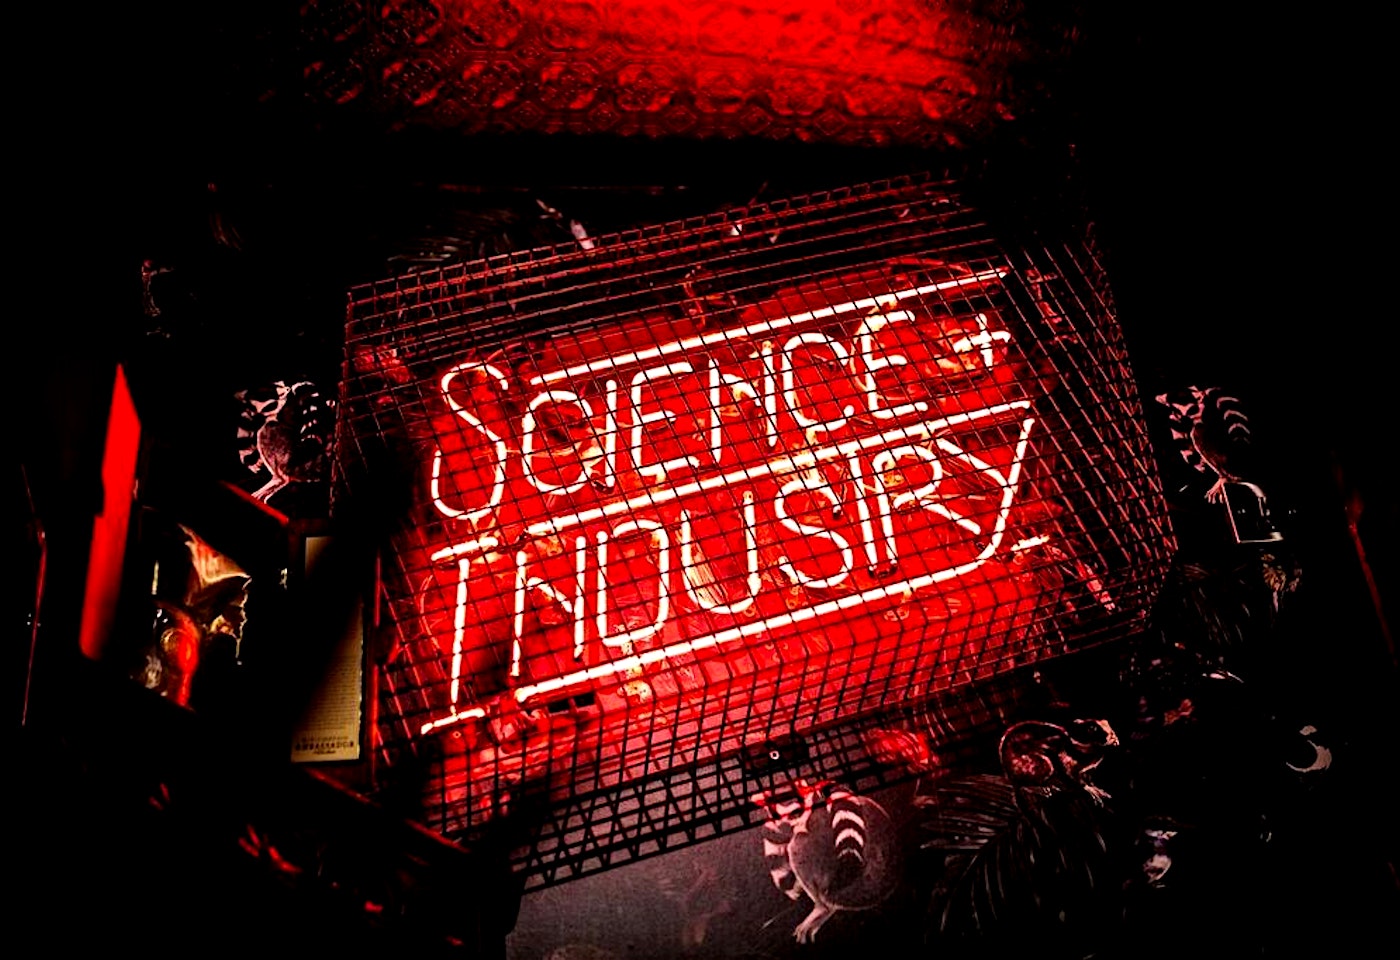 Science and Industry manchester bar 2